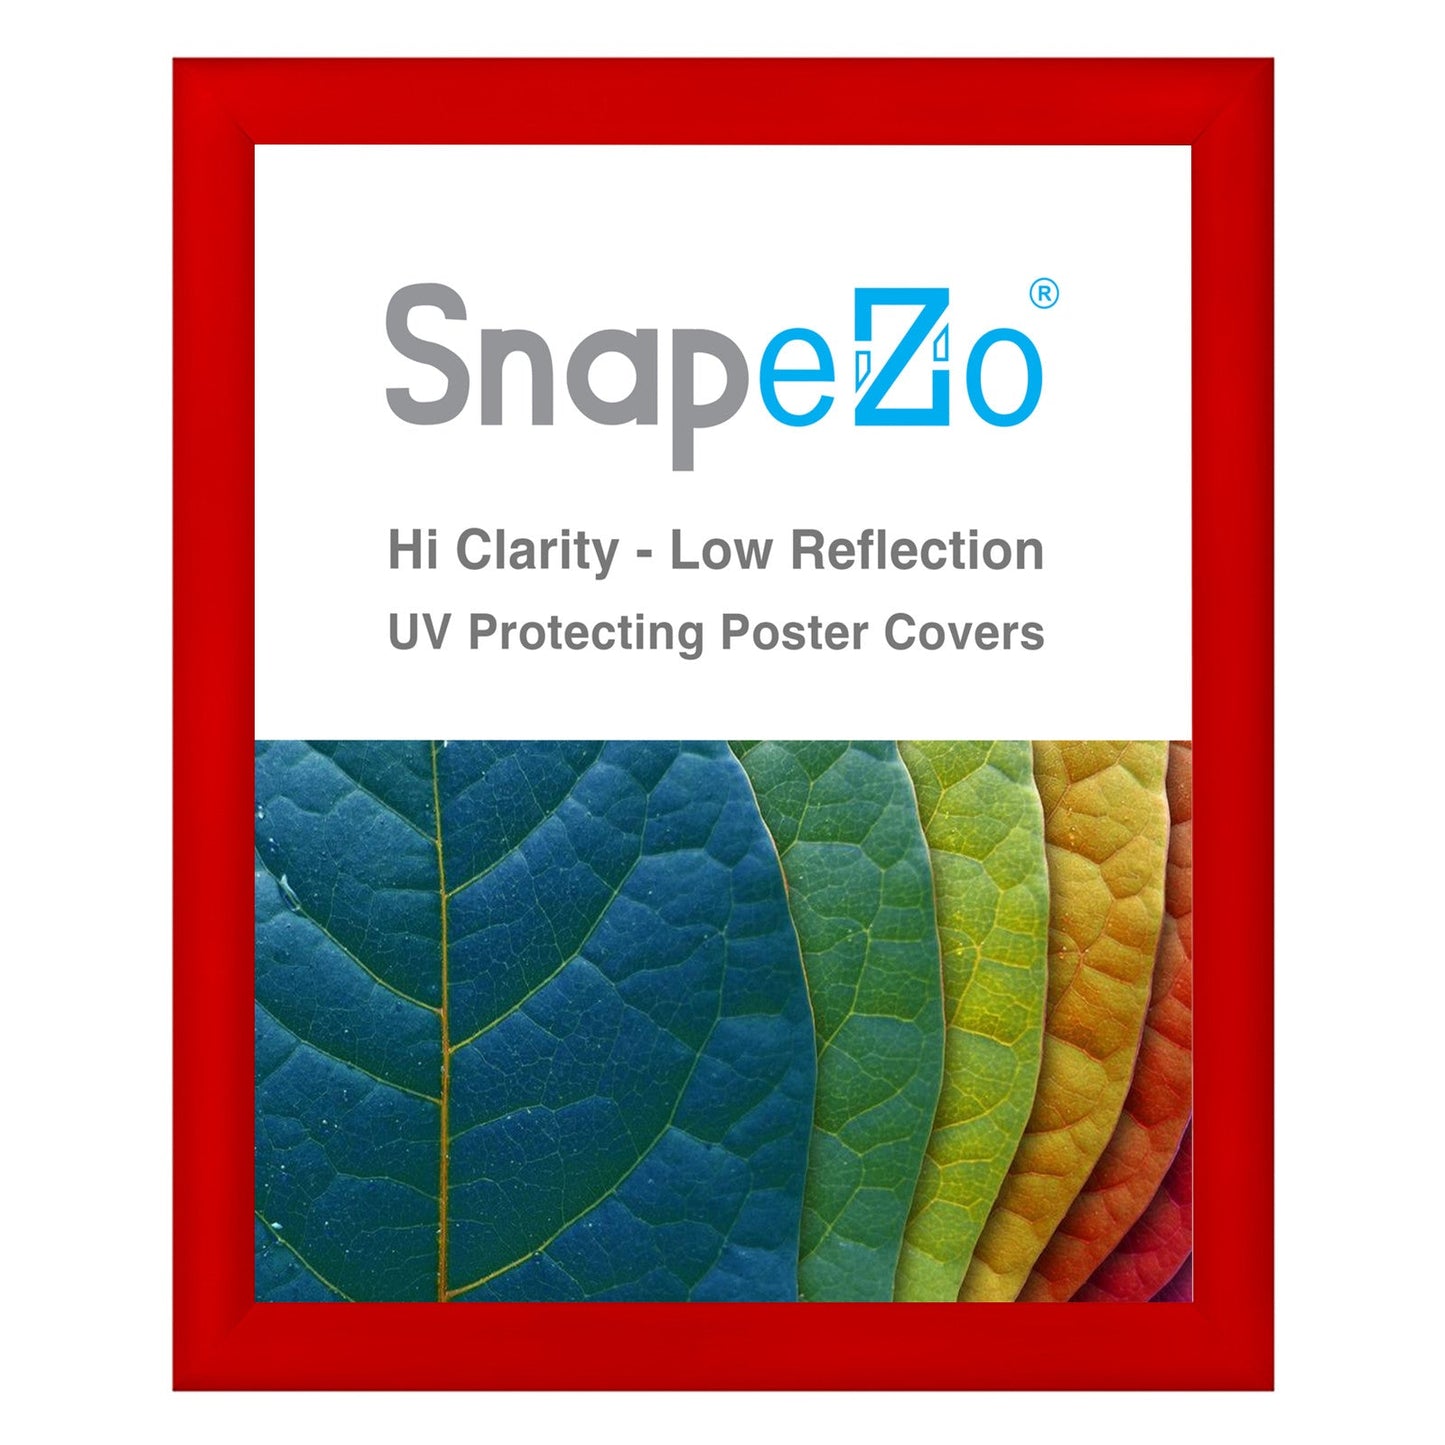 25x31 Red SnapeZo® Snap Frame - 1.2" Profile